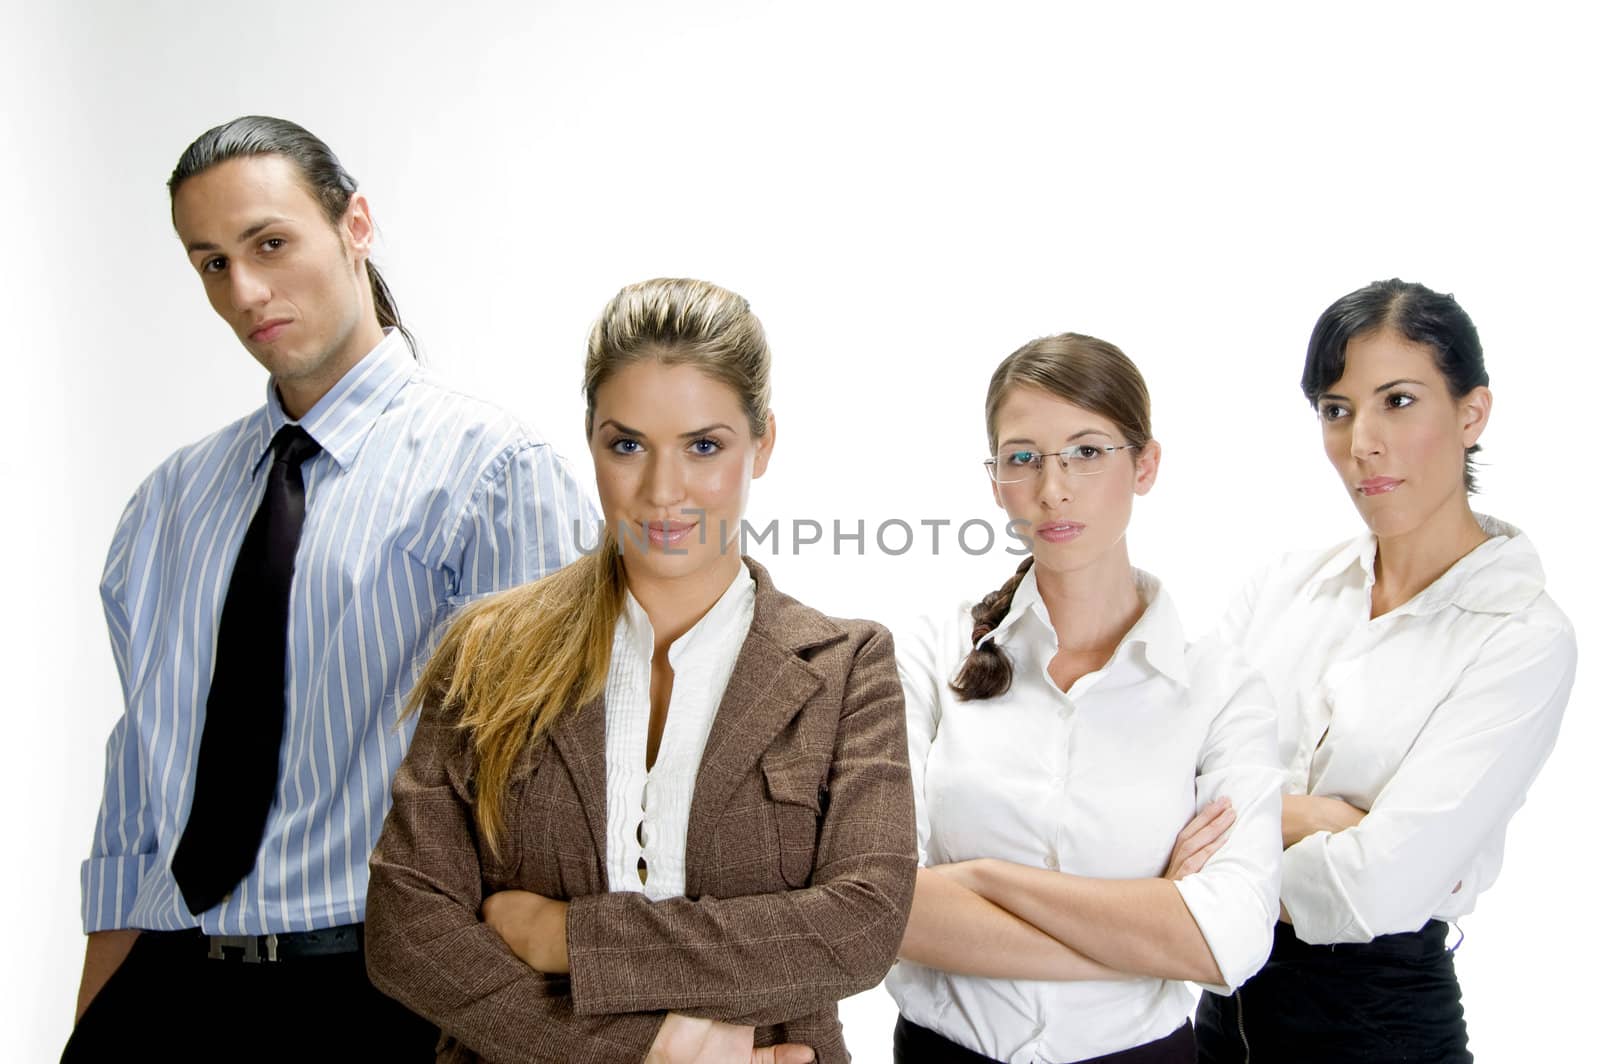  proffesional young business people on an isolated white background